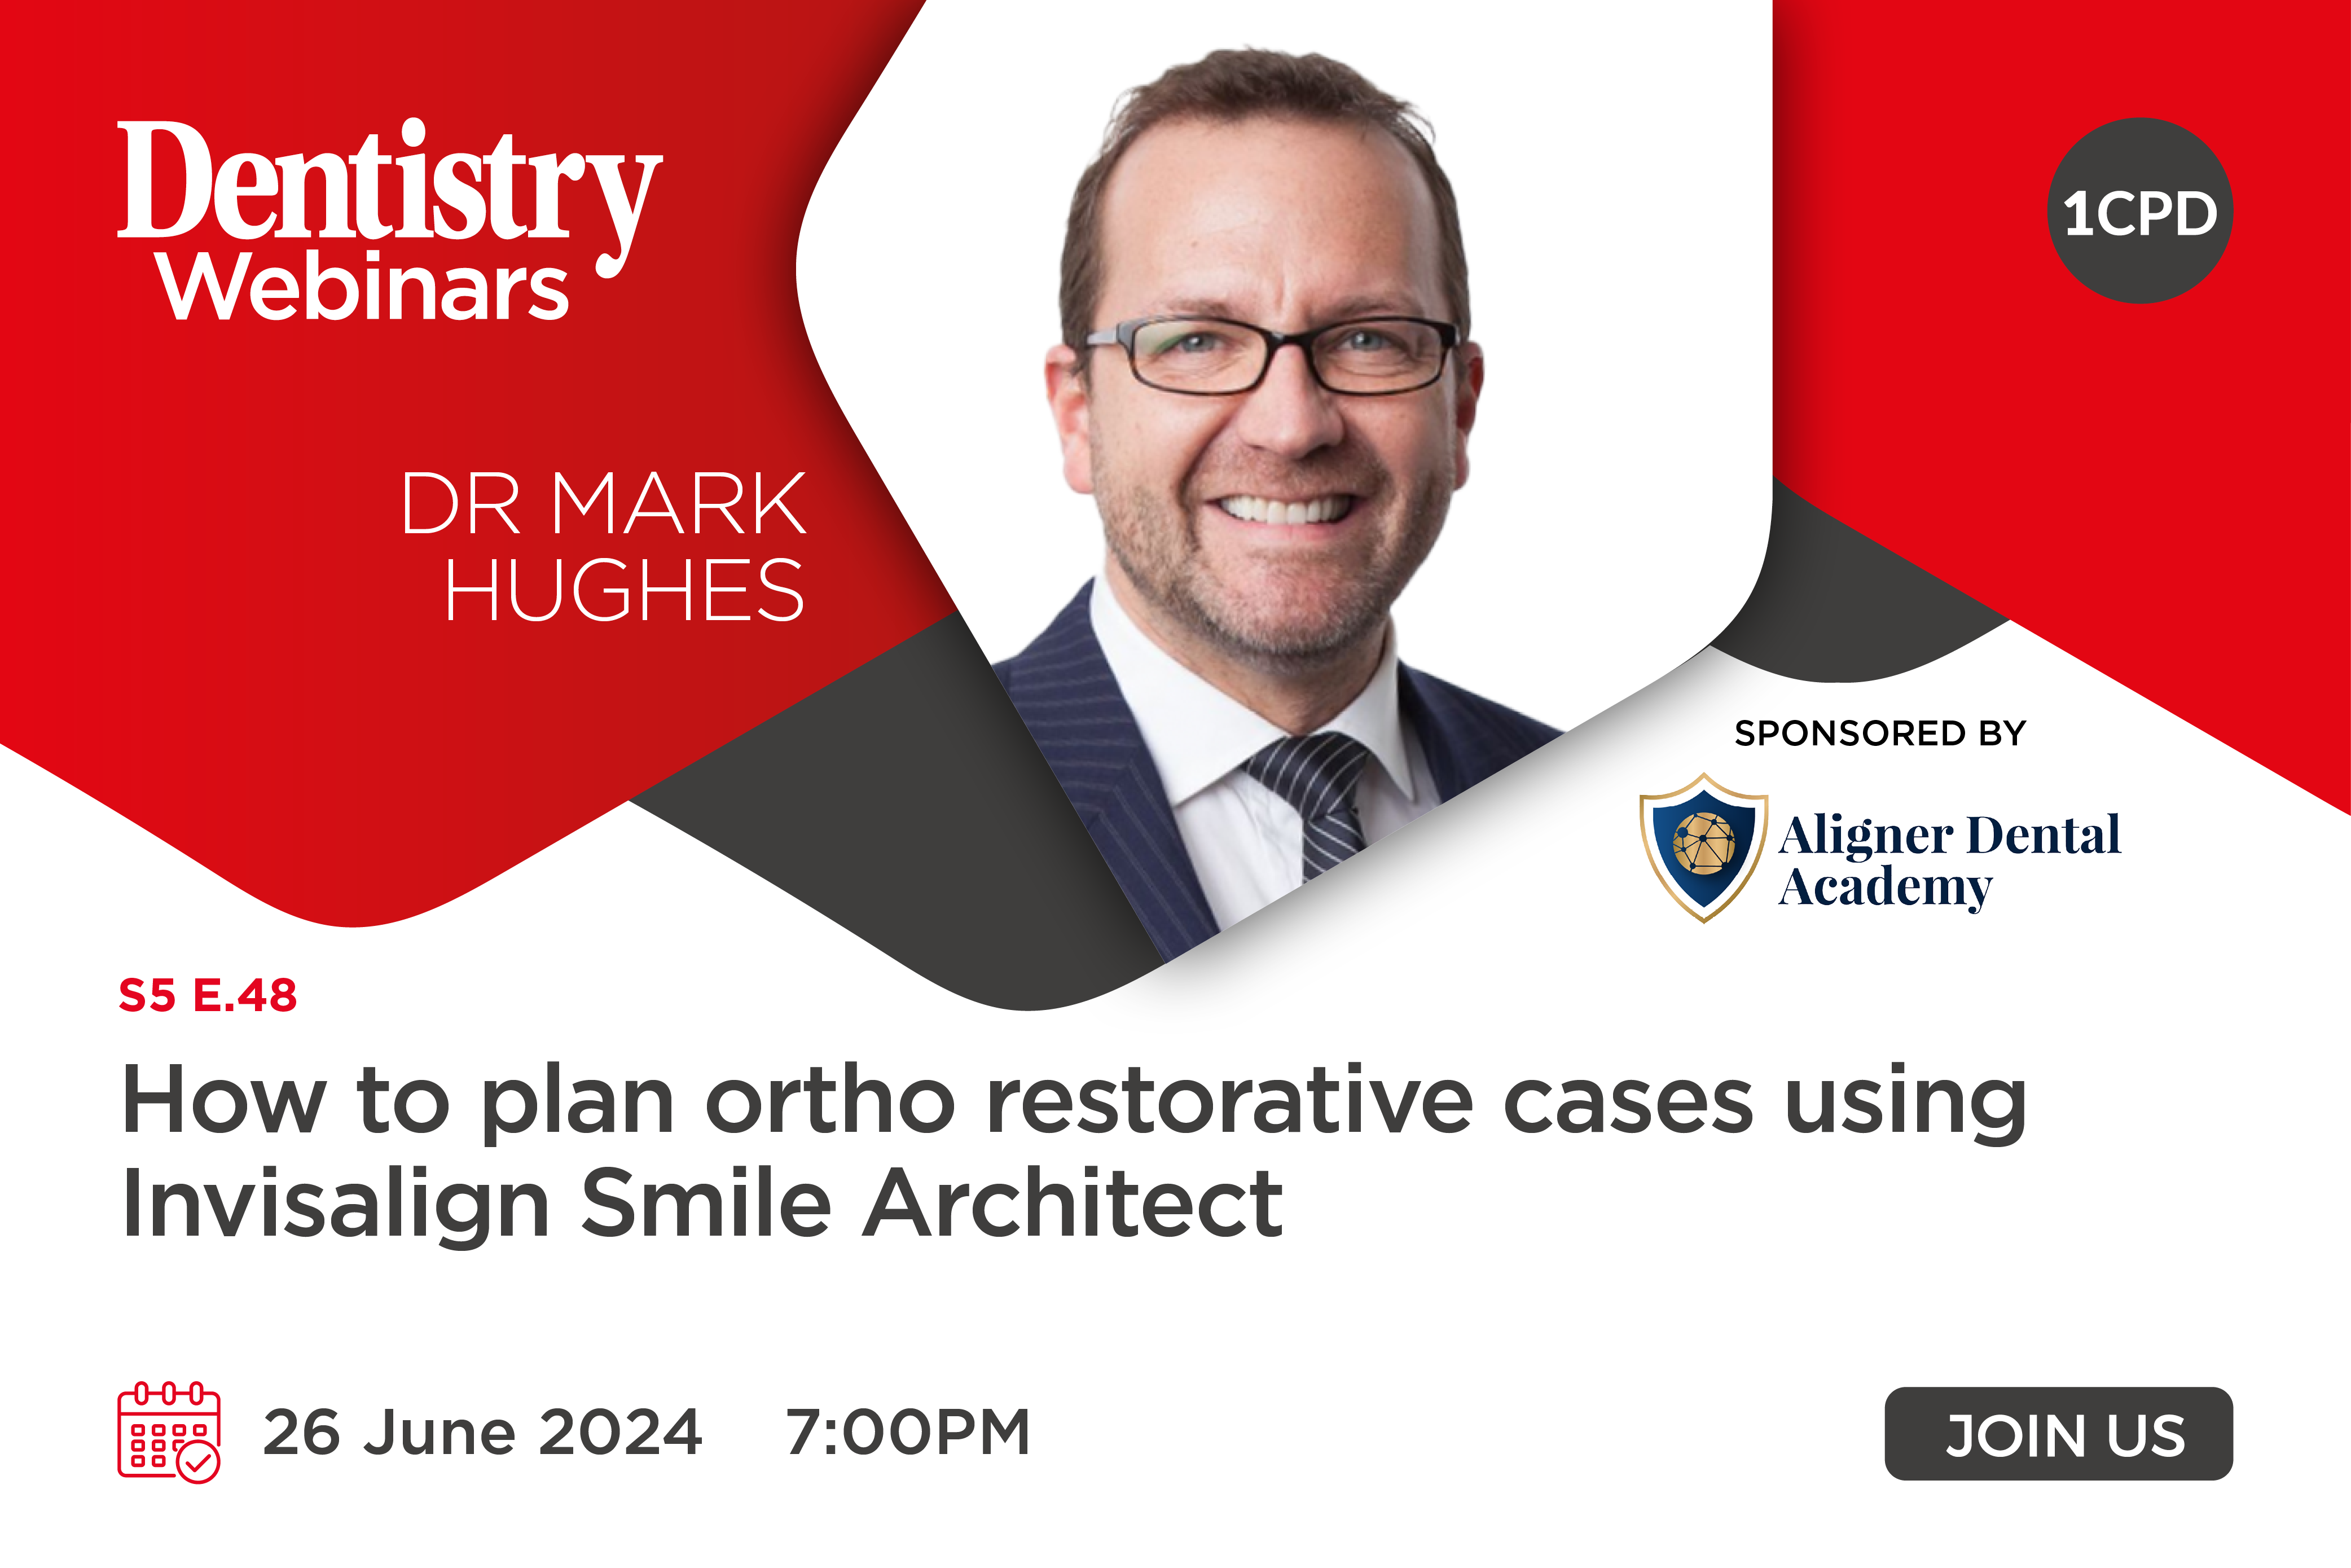 Join Mark Hughes on Wednesday 26 June as he discusses how to plan ortho restorative cases using Invisalign Smile Architect.